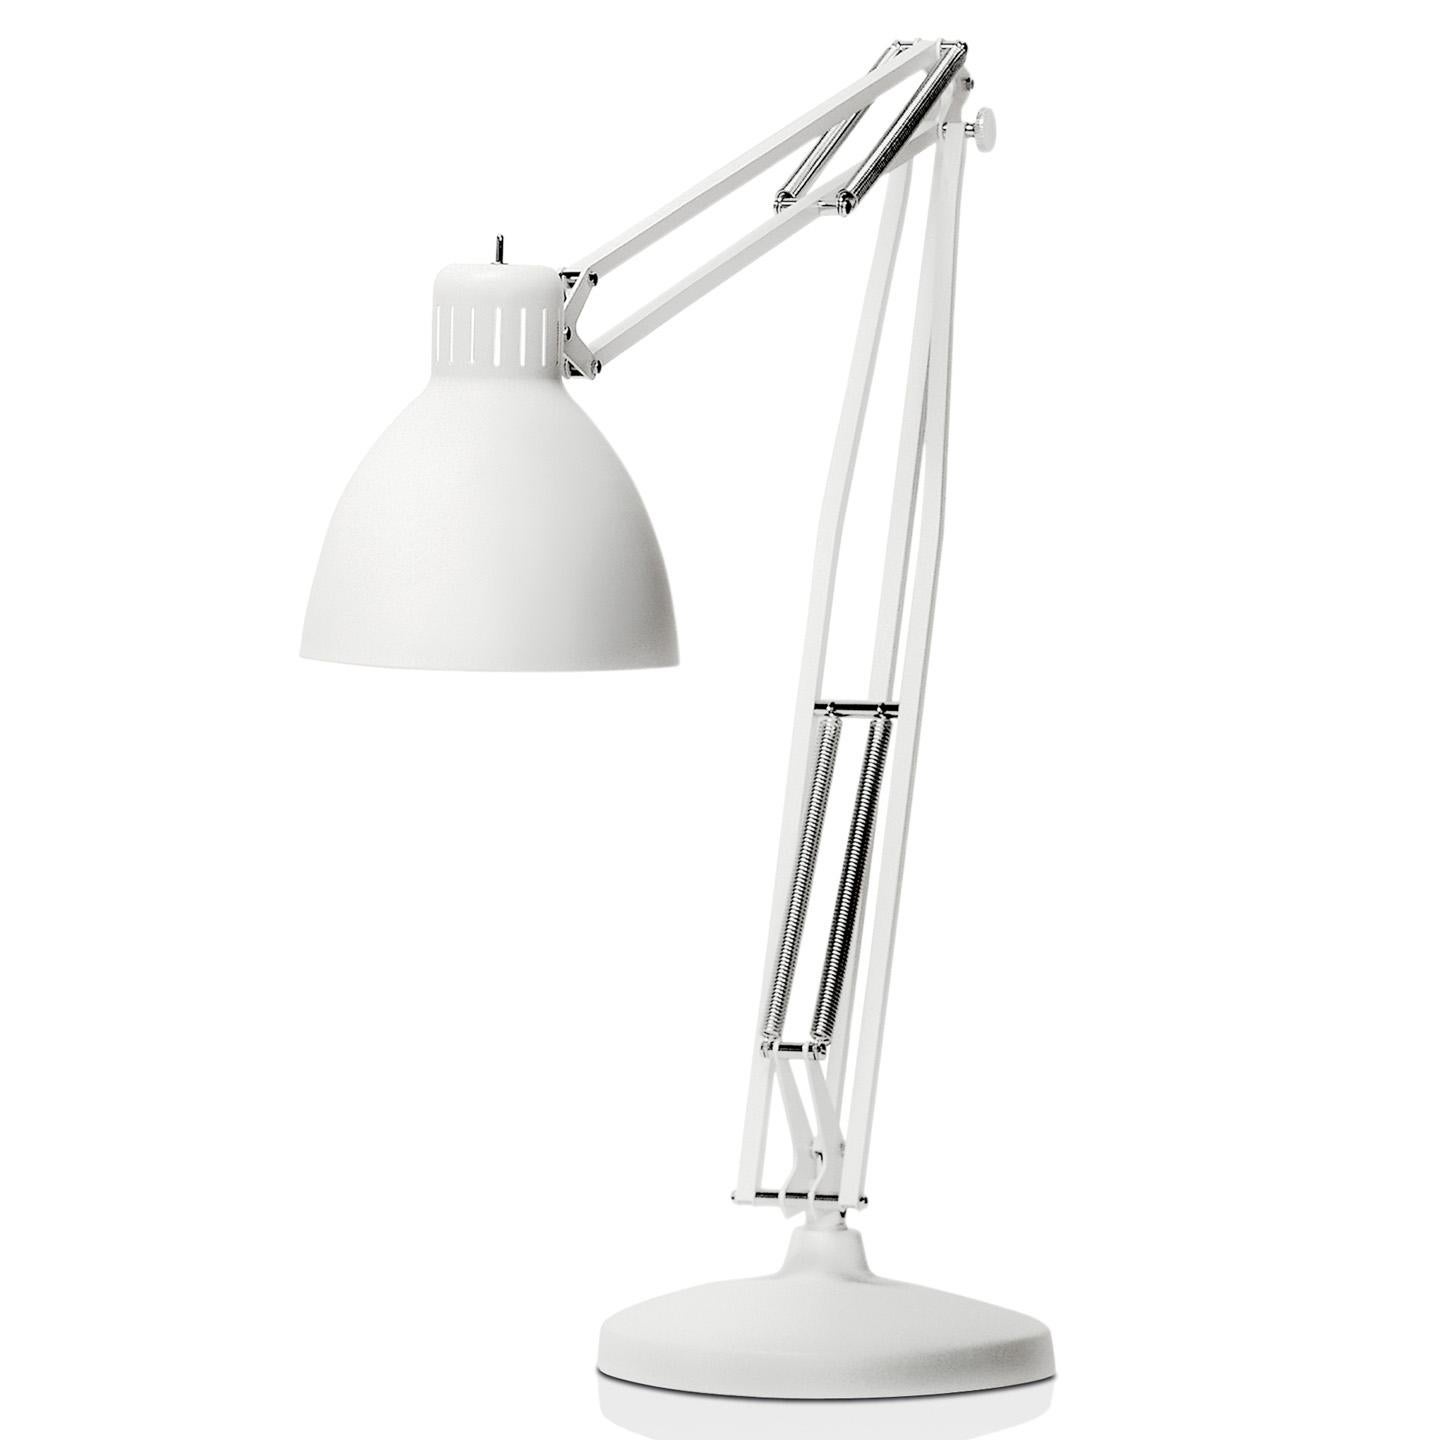 The great JJ floor lamp updates the original Jac Jacobsen L-1 architect desk lamp (1937) for contemporary use. The 2009 refresh of this iconic design is a clever play on scale that turns a simple Classic task lamp into a bold statement piece for